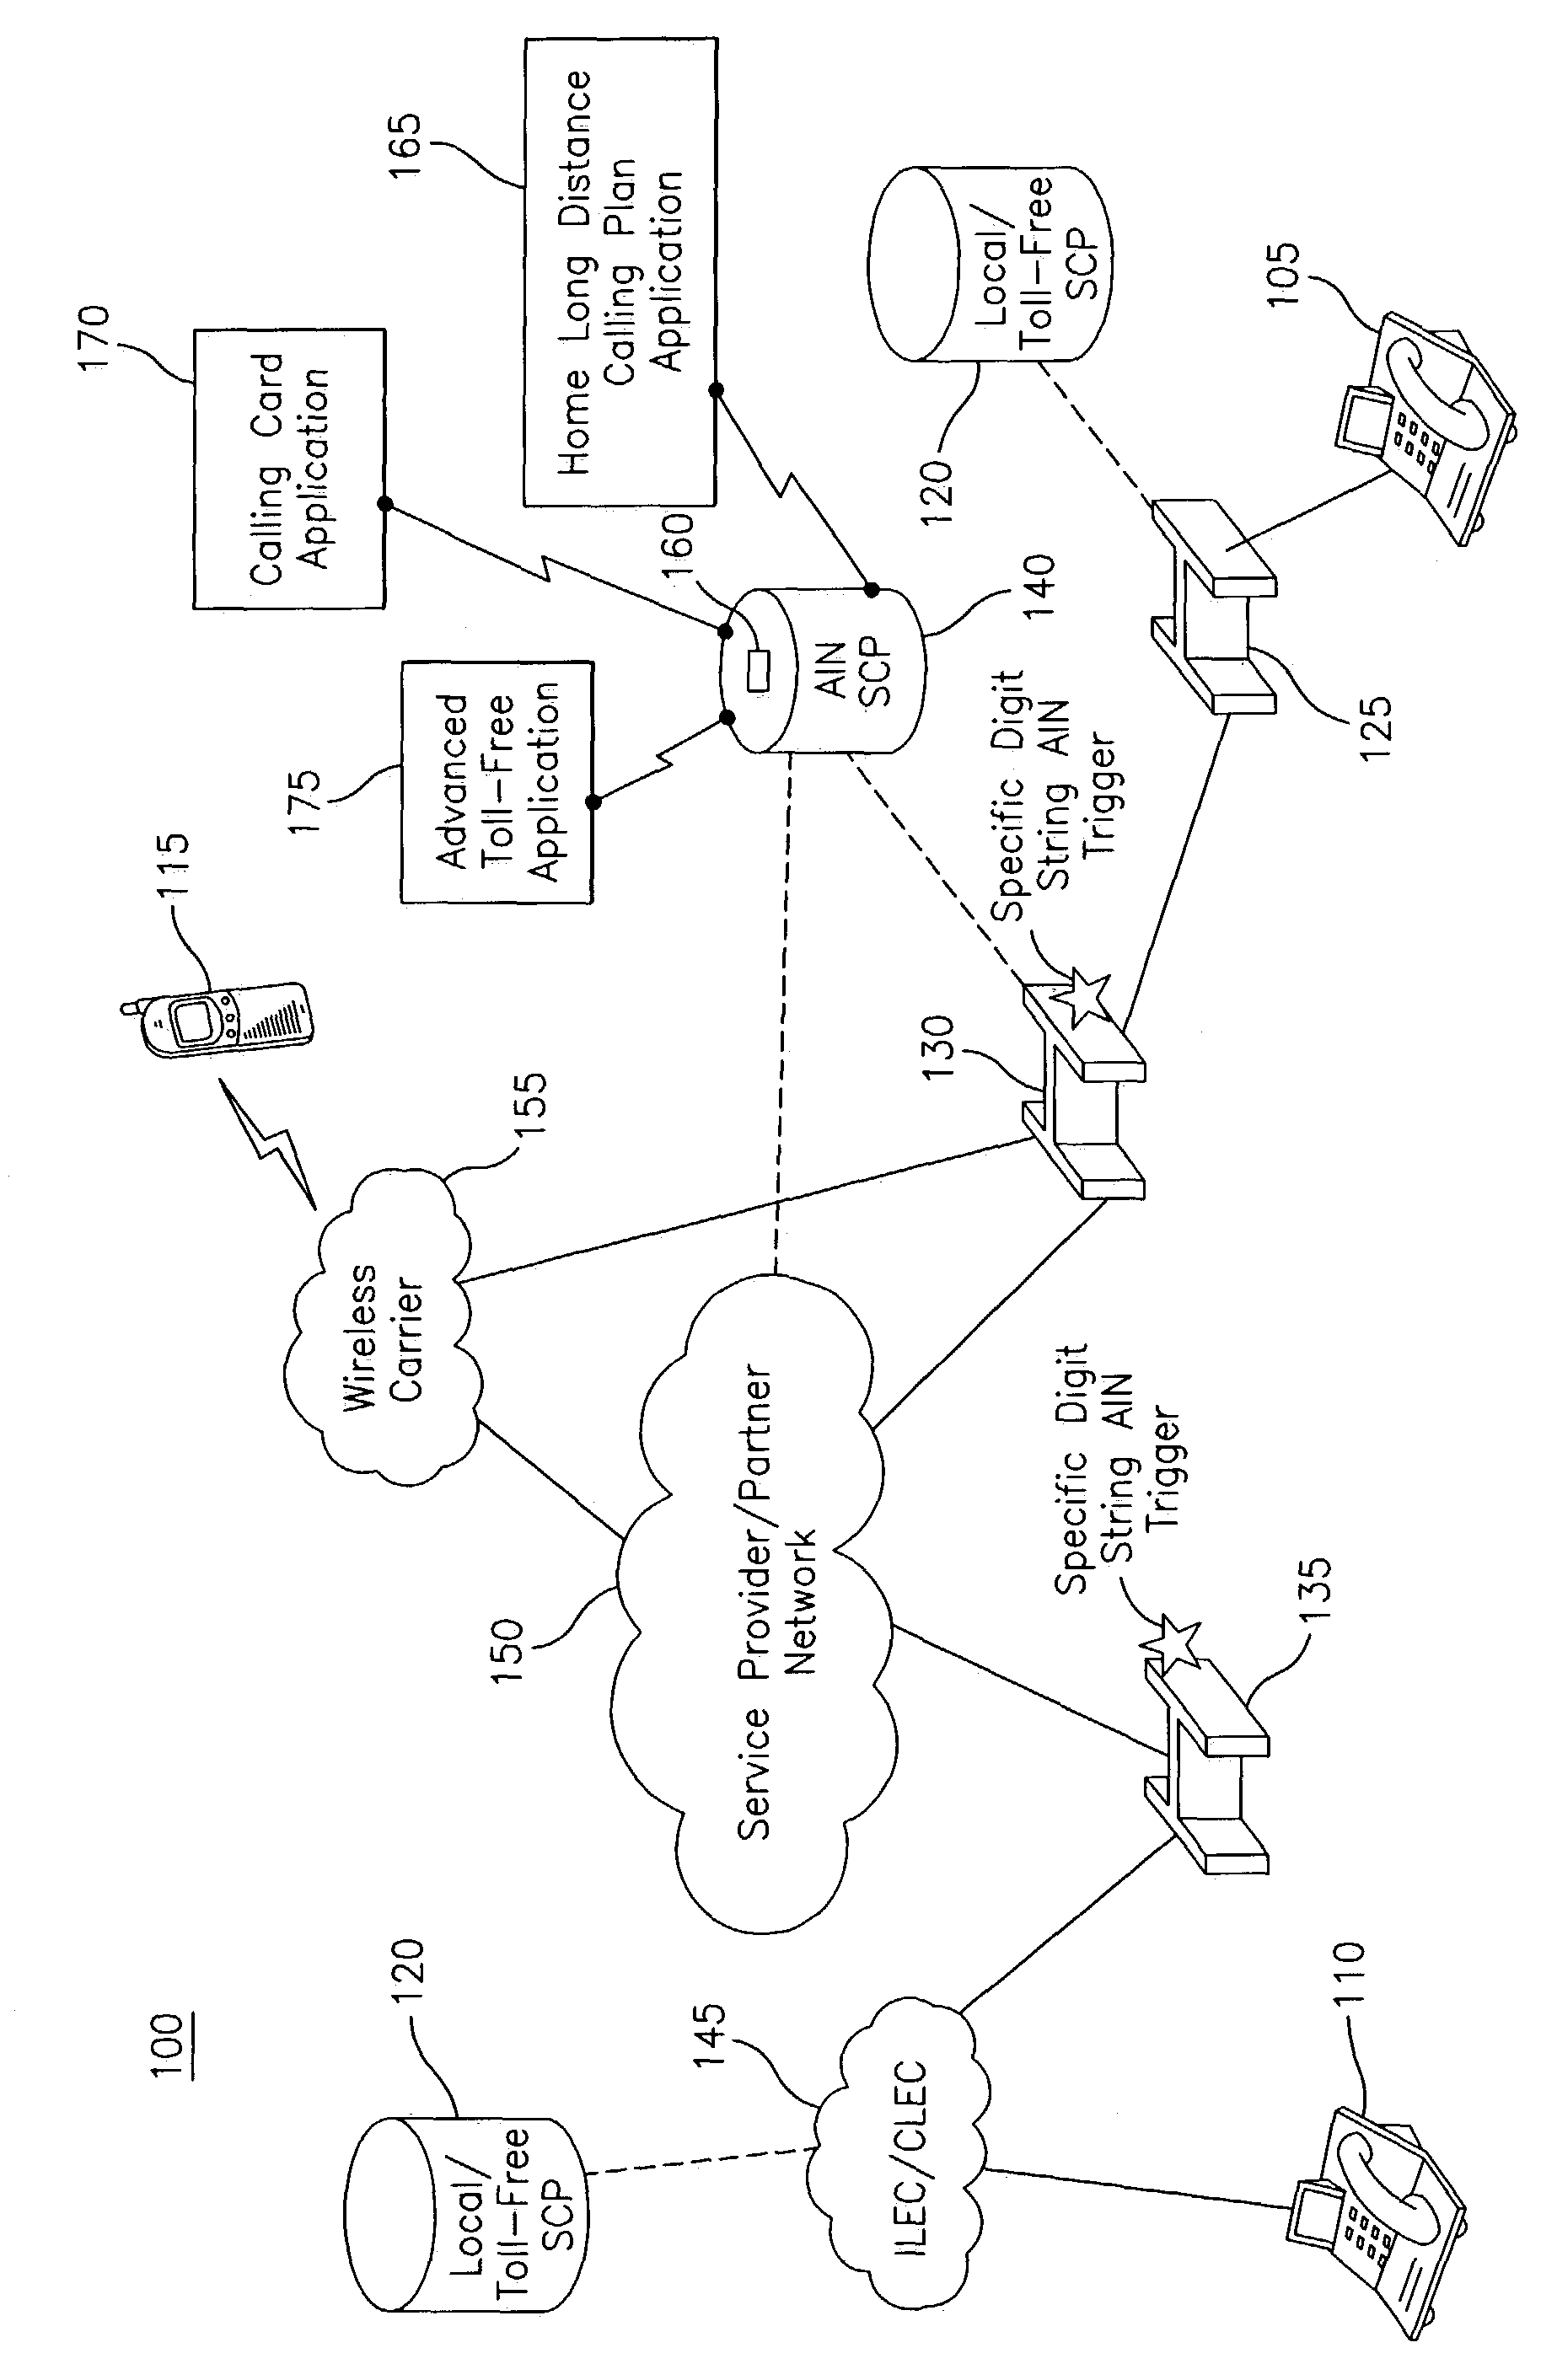 Method and apparatus for making a long distance telephone call